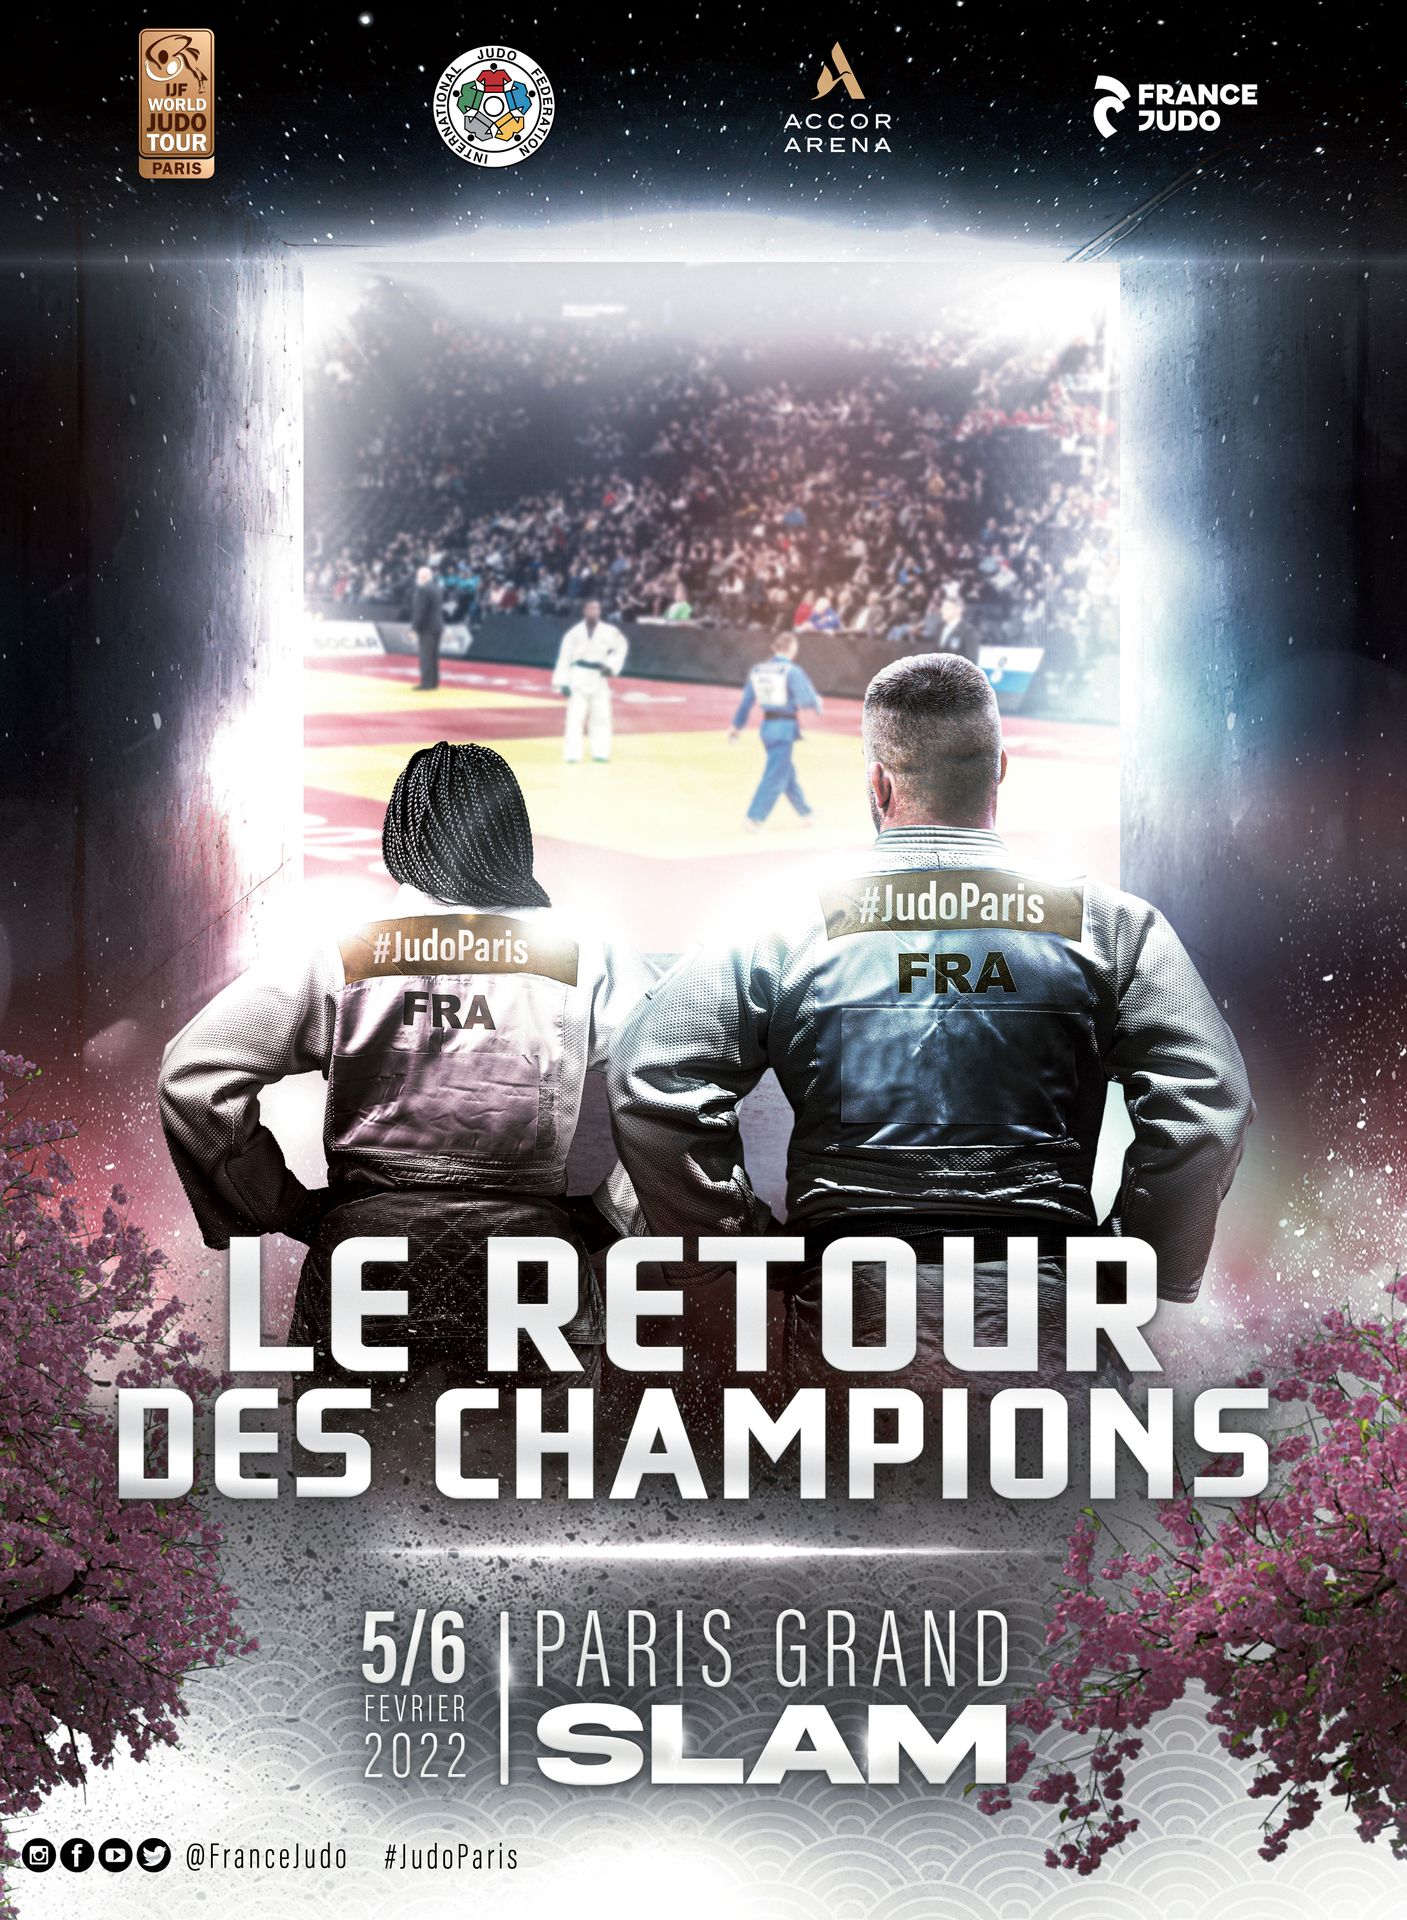 Teddy RINER 2 VIP tickets to attend the Paris Grand Slam (February 5 or 6, 2022)&hellip;